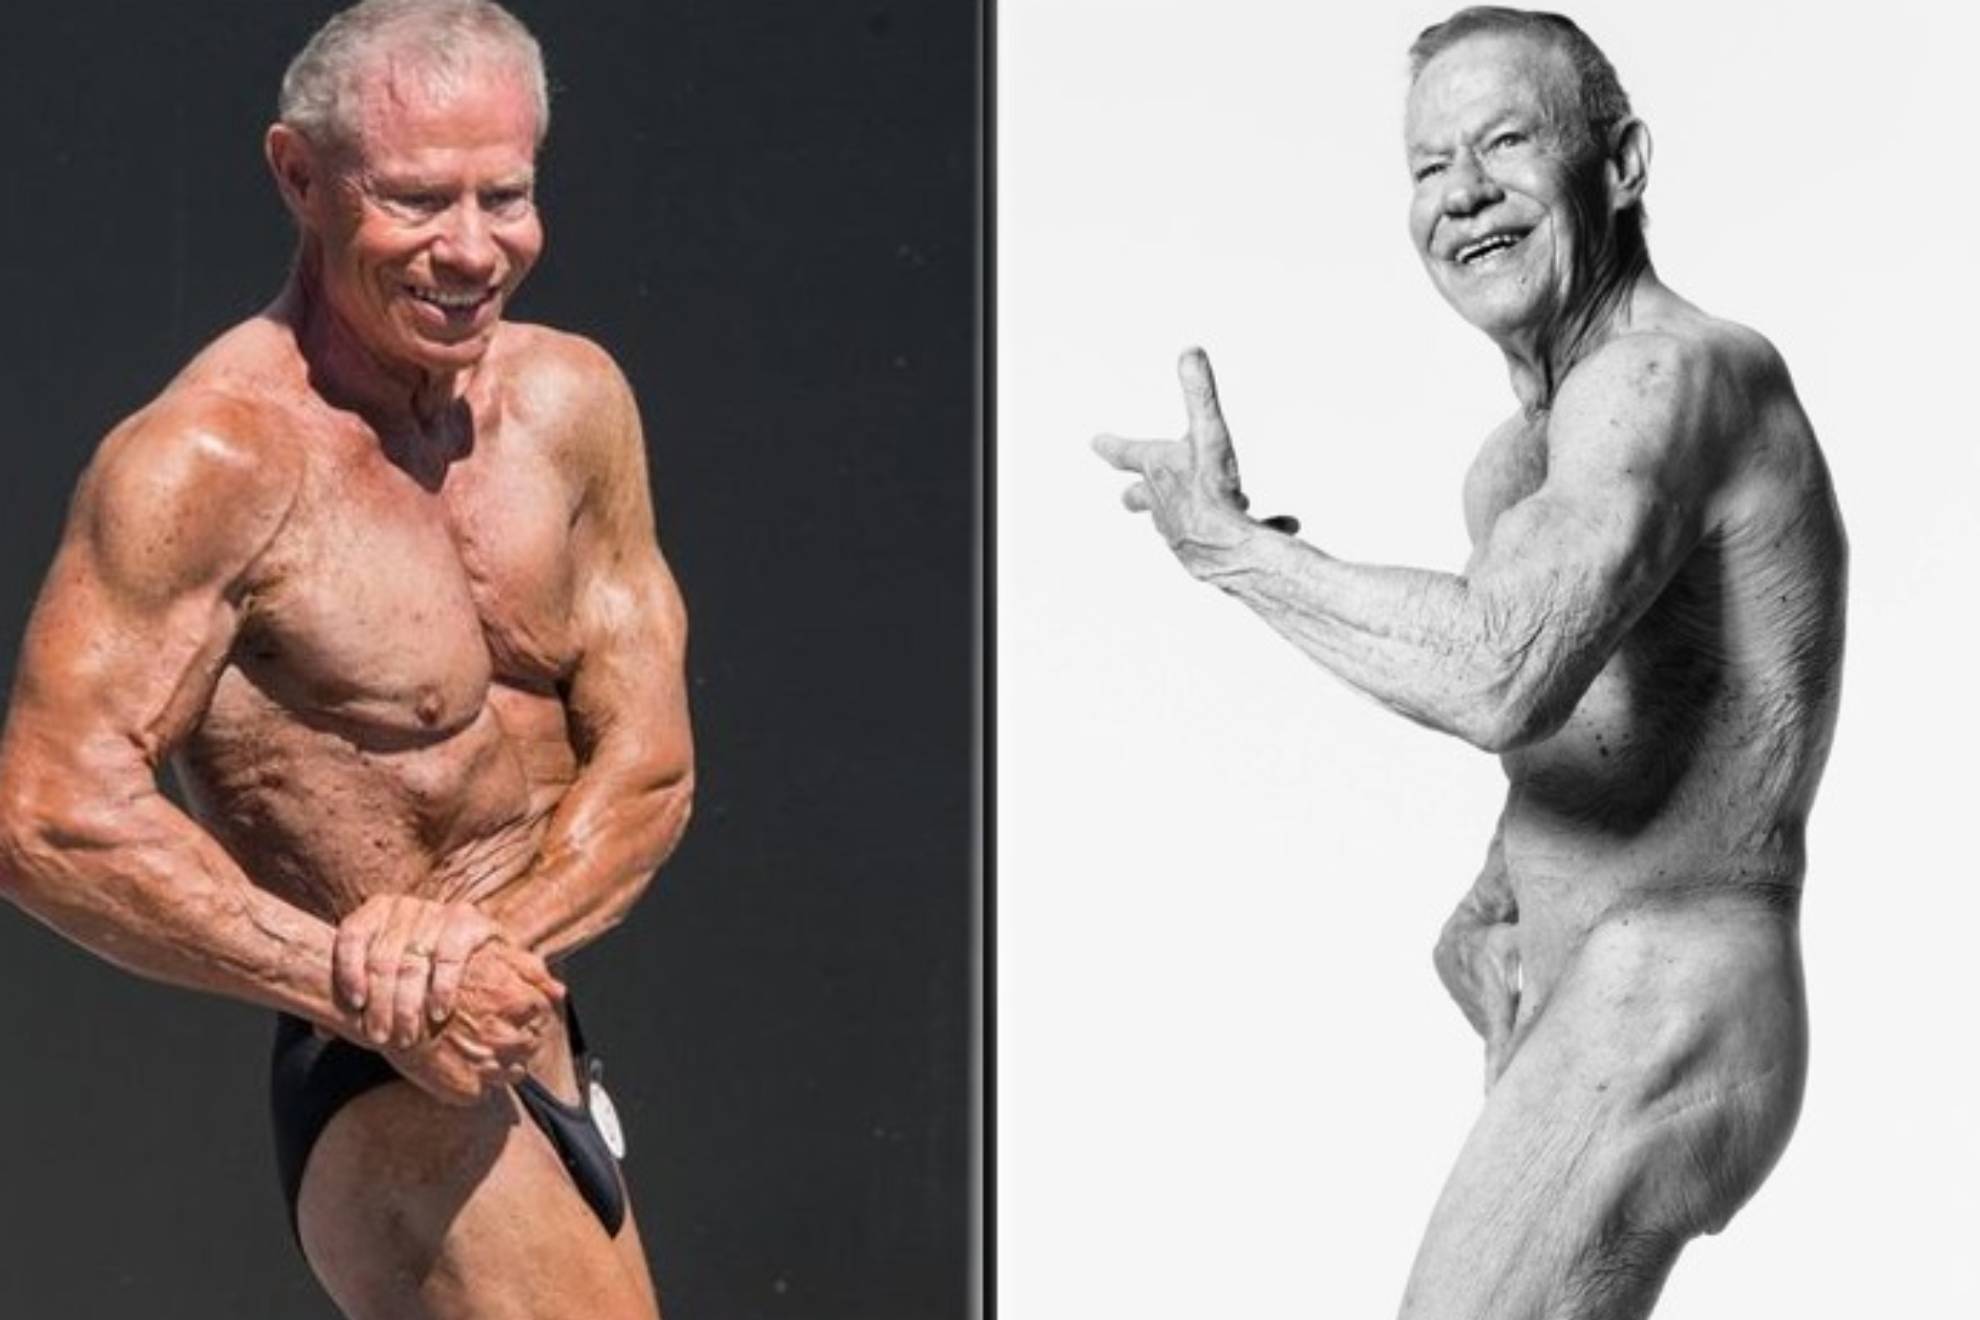 Jim Arrington, the world's oldest bodybuilder turns 91 and still competes